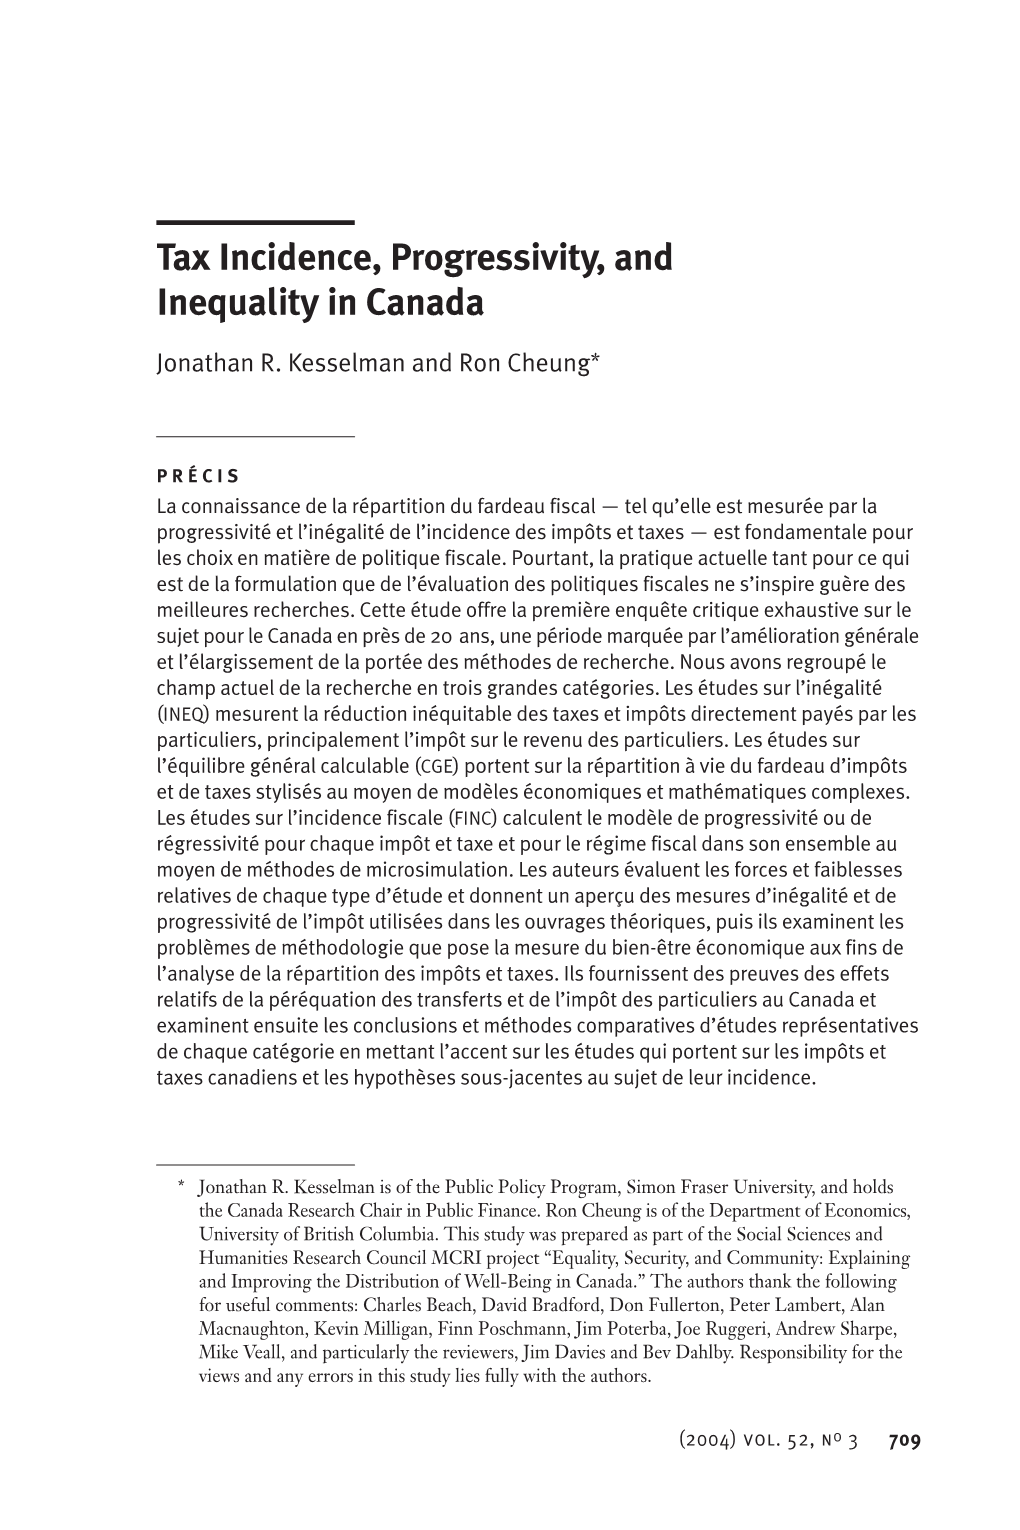 Tax Incidence, Progressivity, and Inequality in Canada